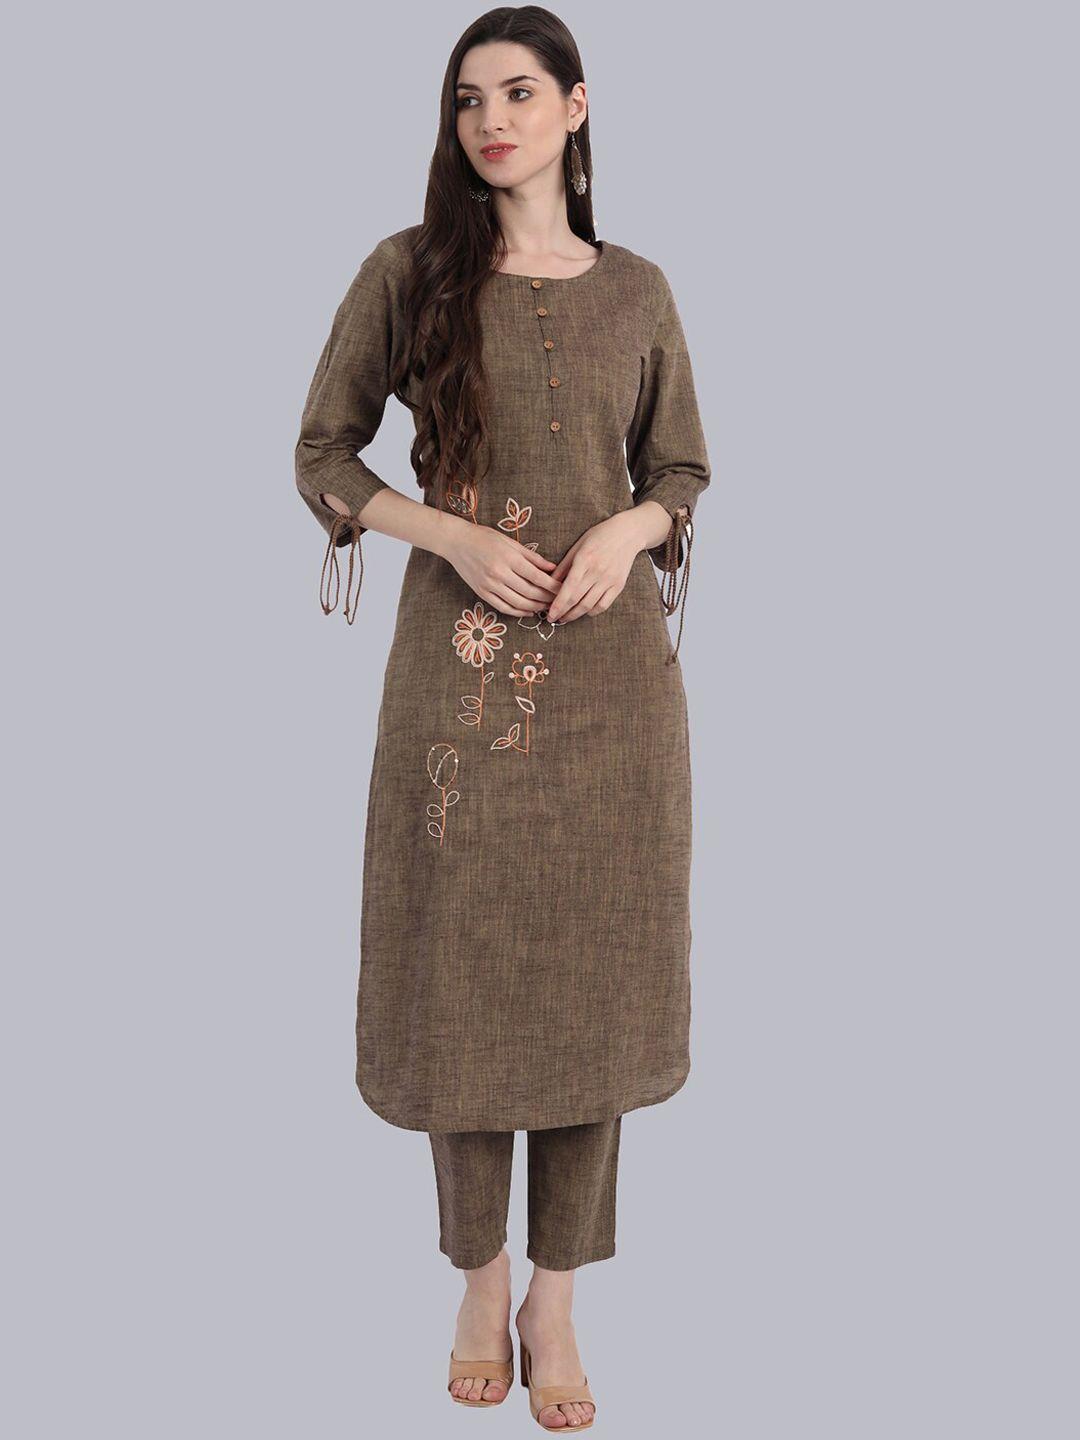 nh kapdewala embroidered thread work pure cotton kurta with trousers